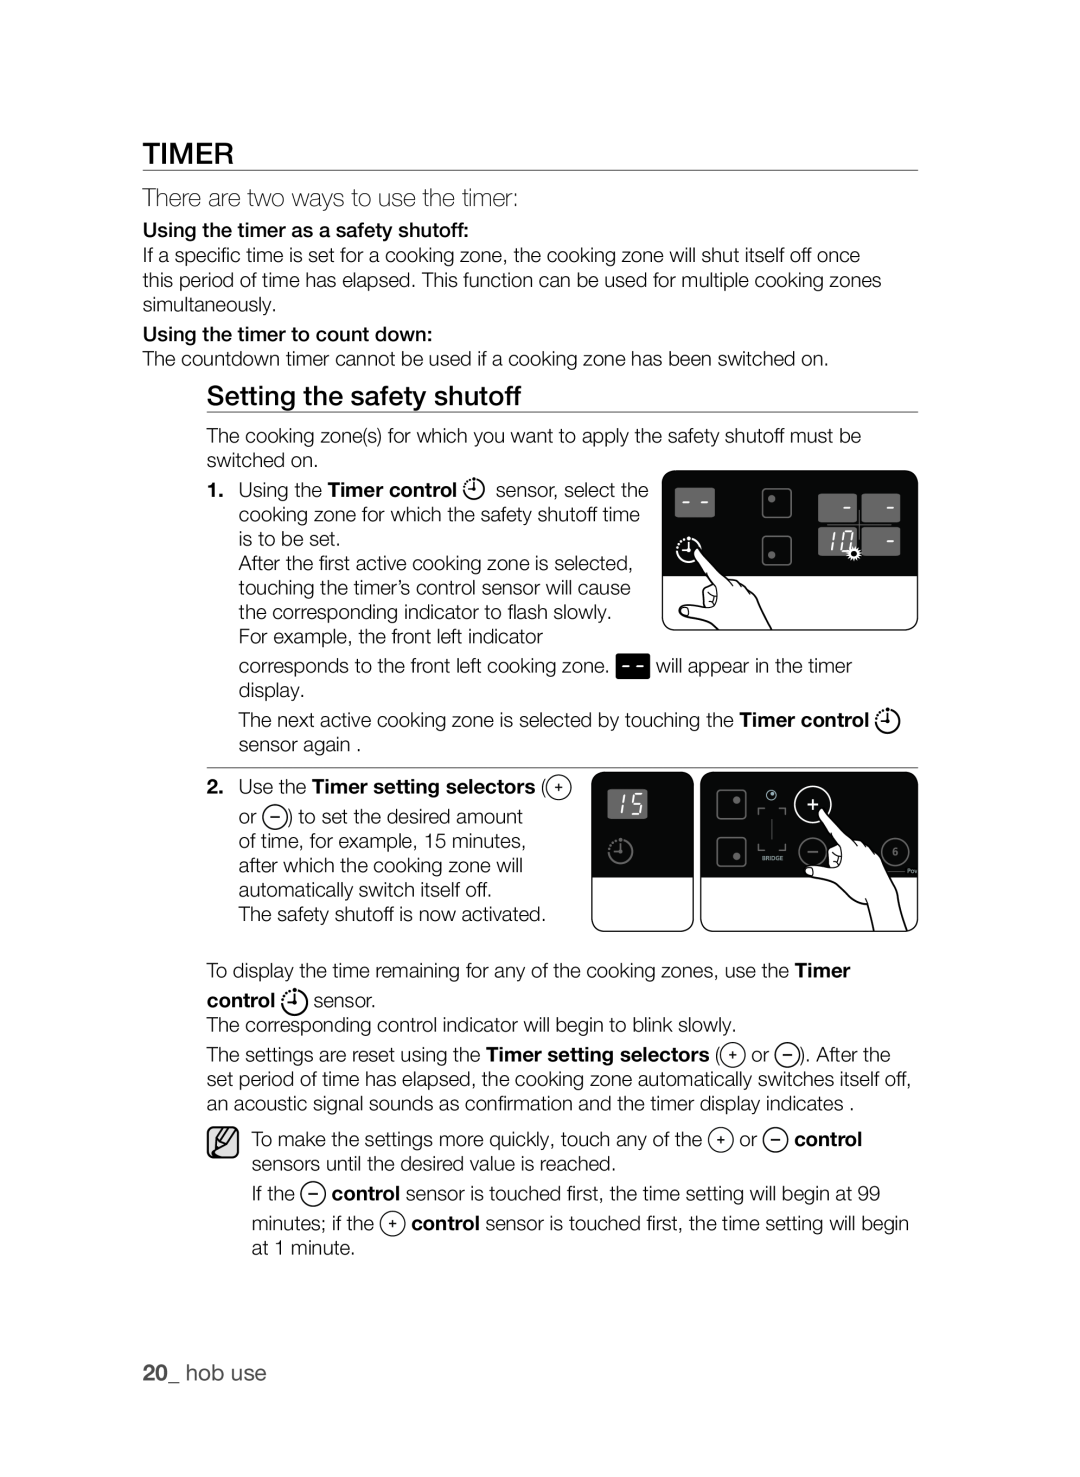 Samsung CTI613GI user manual Timer, Setting the safety shutoff, There are two ways to use the timer, hob use, control 